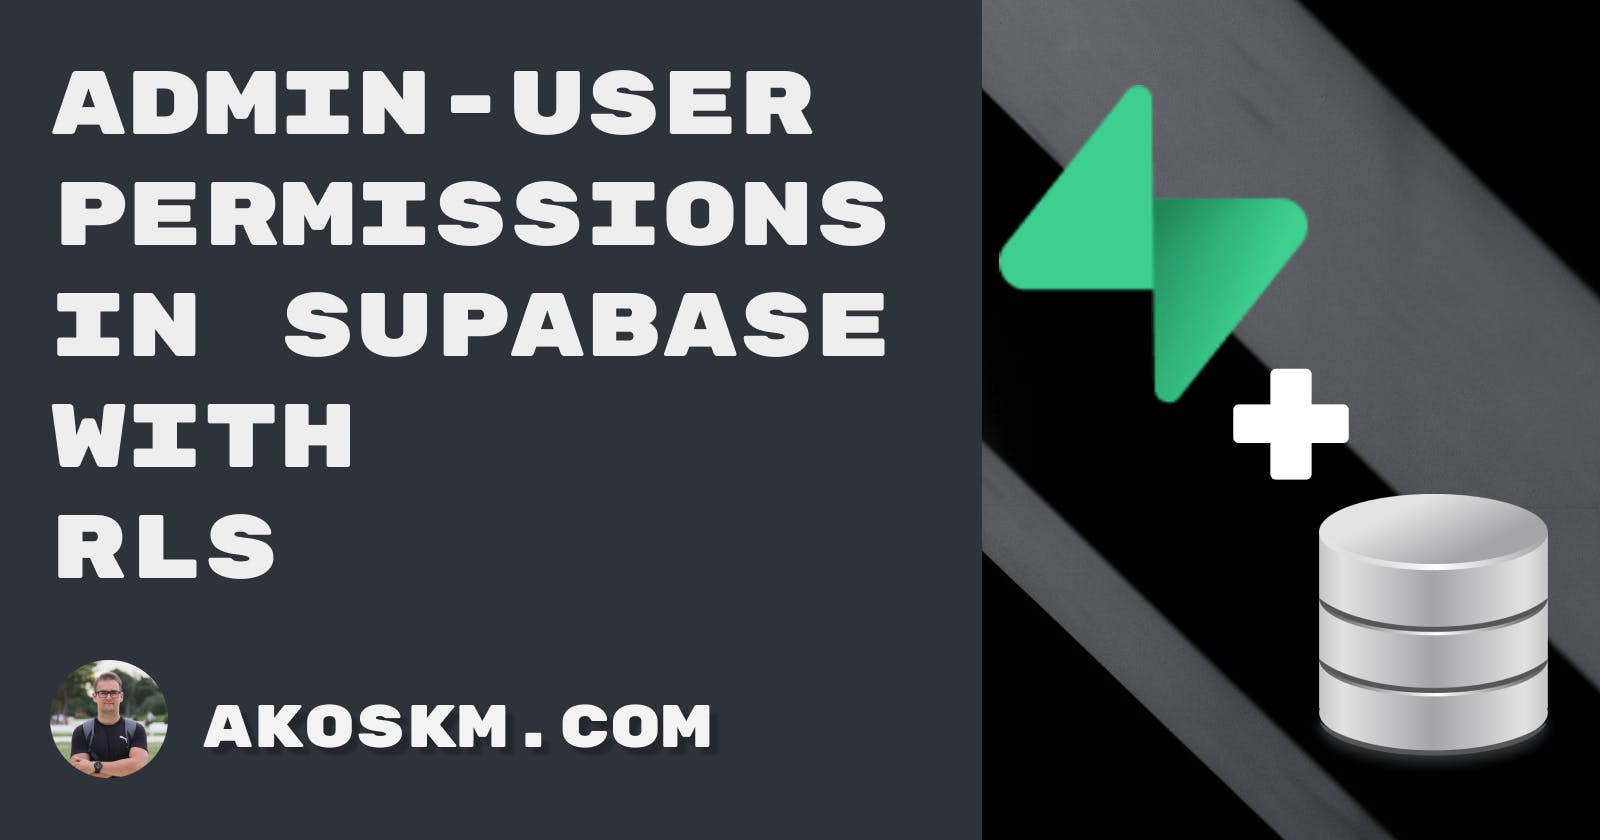 Admin-user permissions in Supabase with RLS